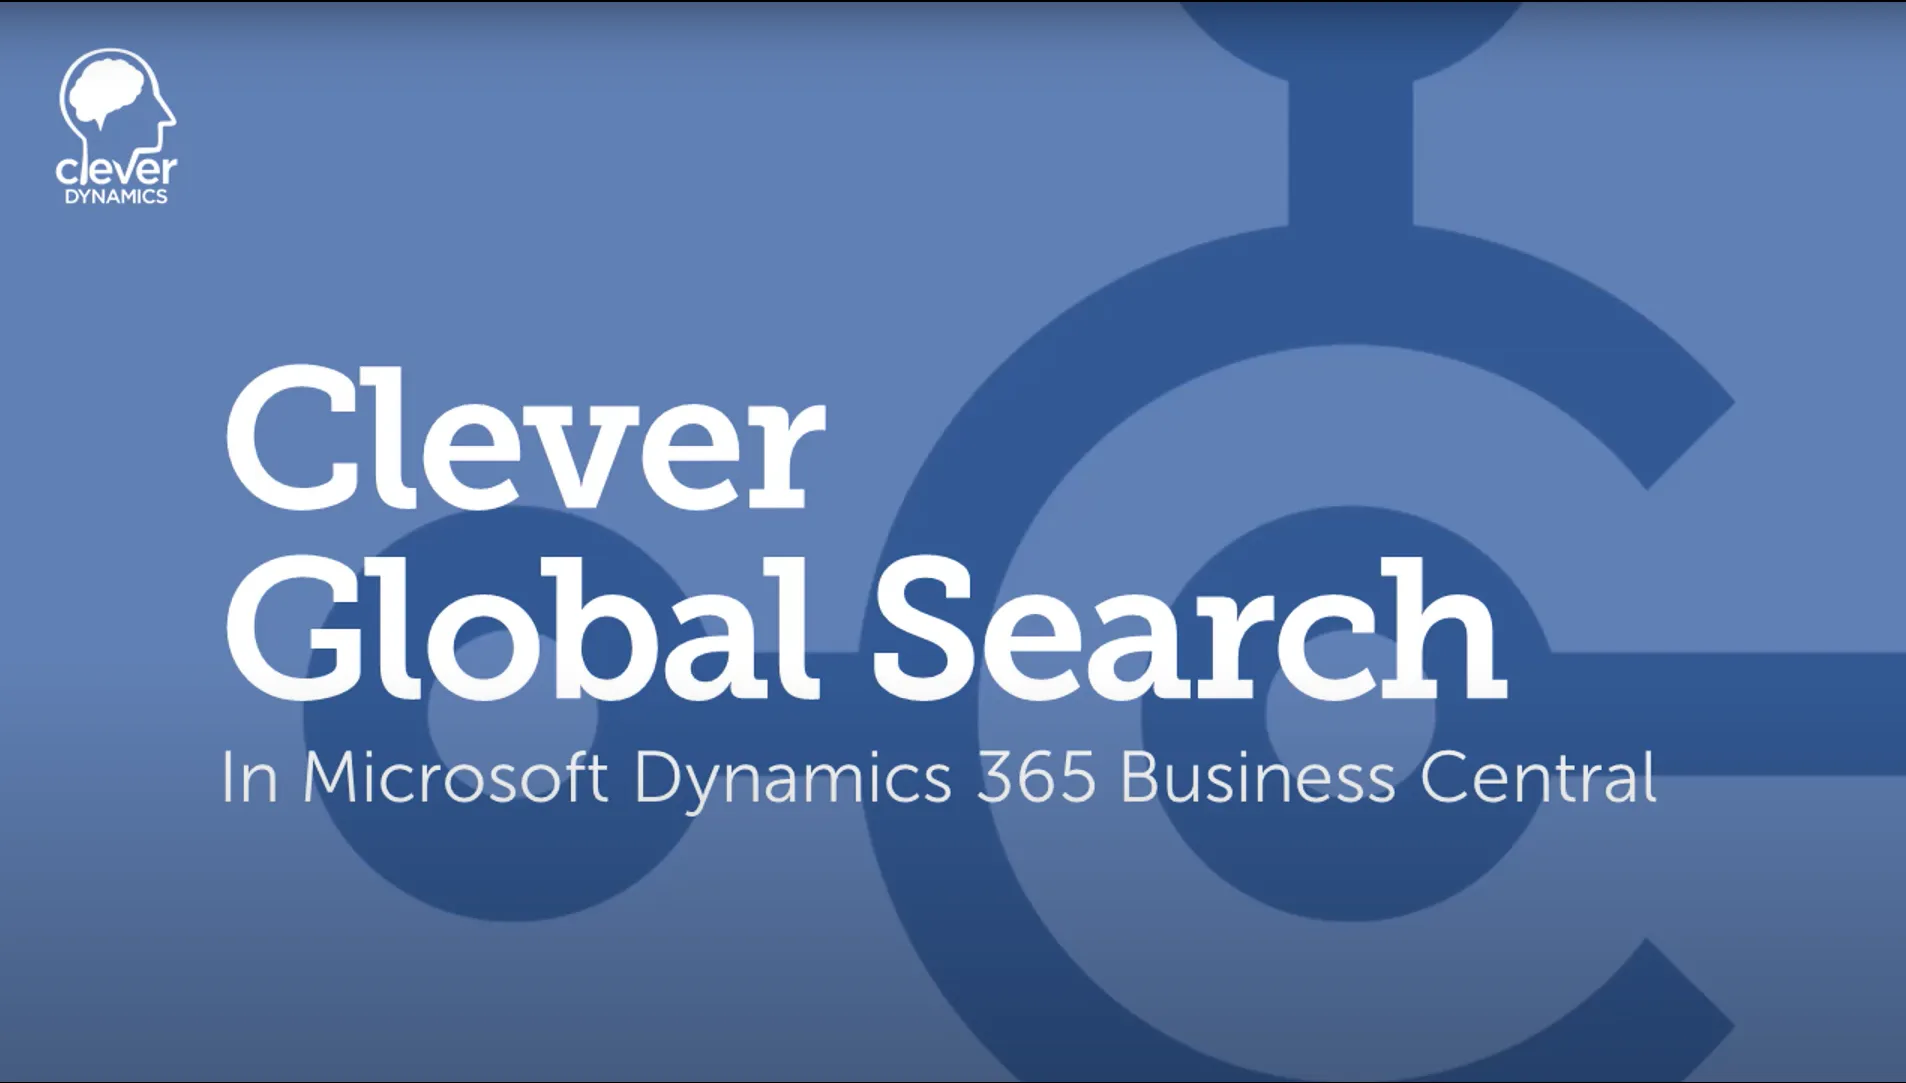 Clever Global Search by Clever Dynamics for Dynamics 365